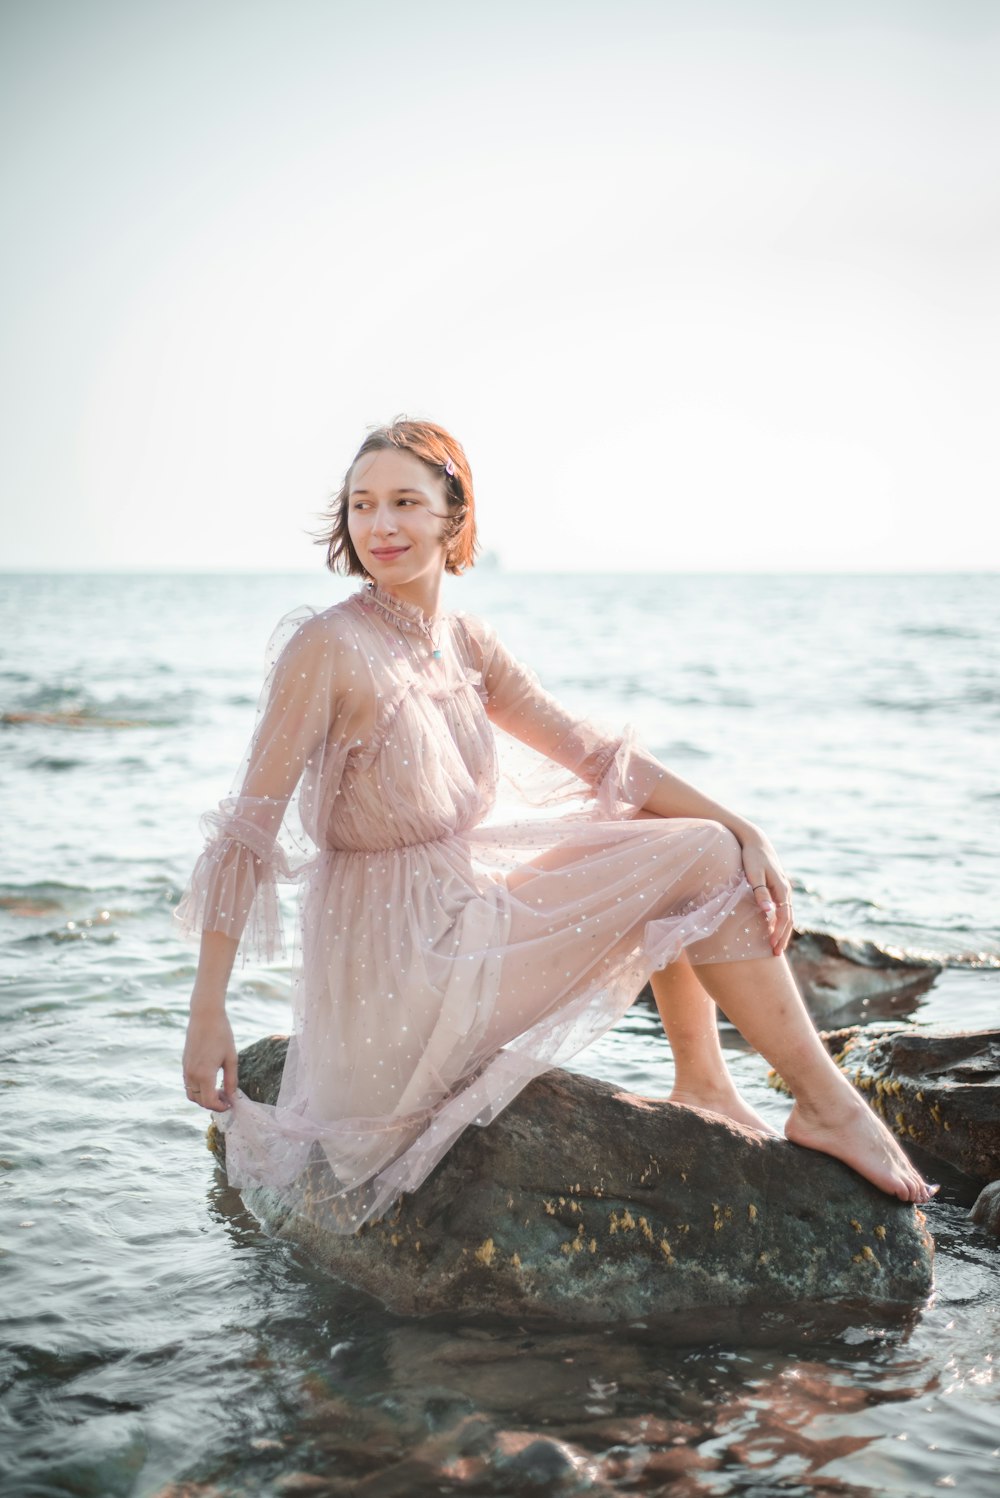 woman wearing beige long-sleeved dress sitting on rock while glancing her right side near sea during daytime